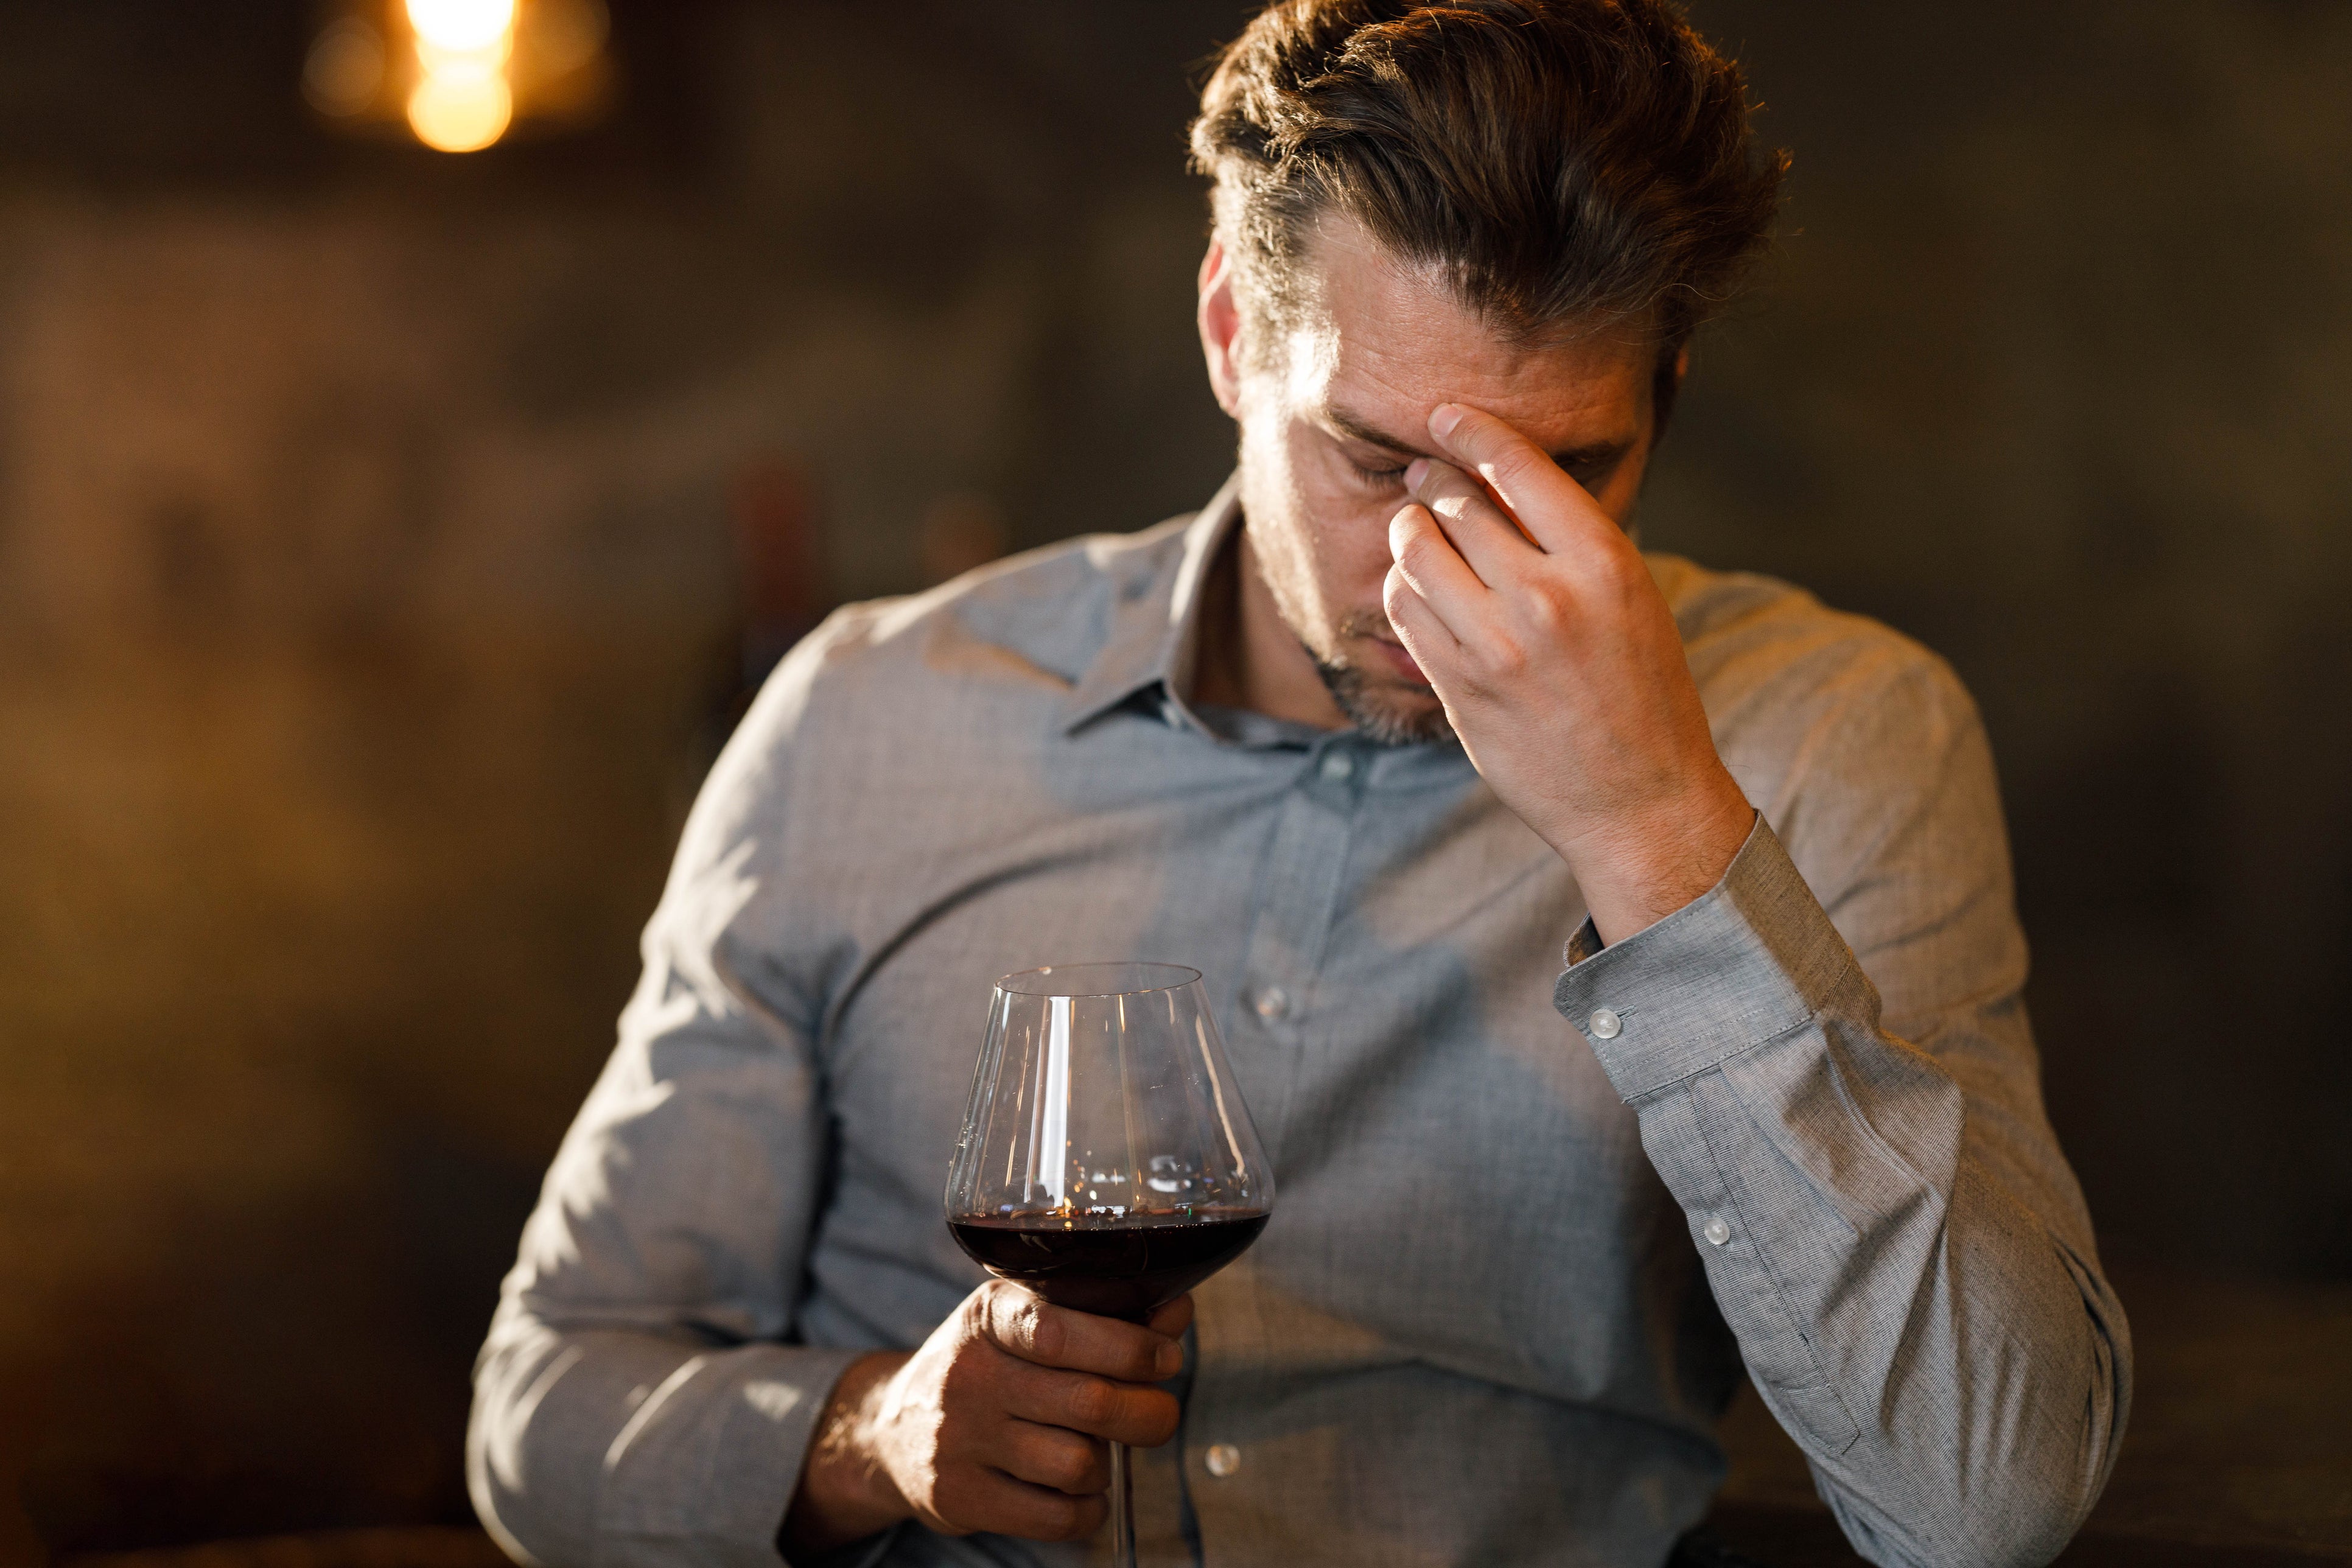 Research shows that those who experienced stress during the pandemic increased the amount of alcohol they drank and how often